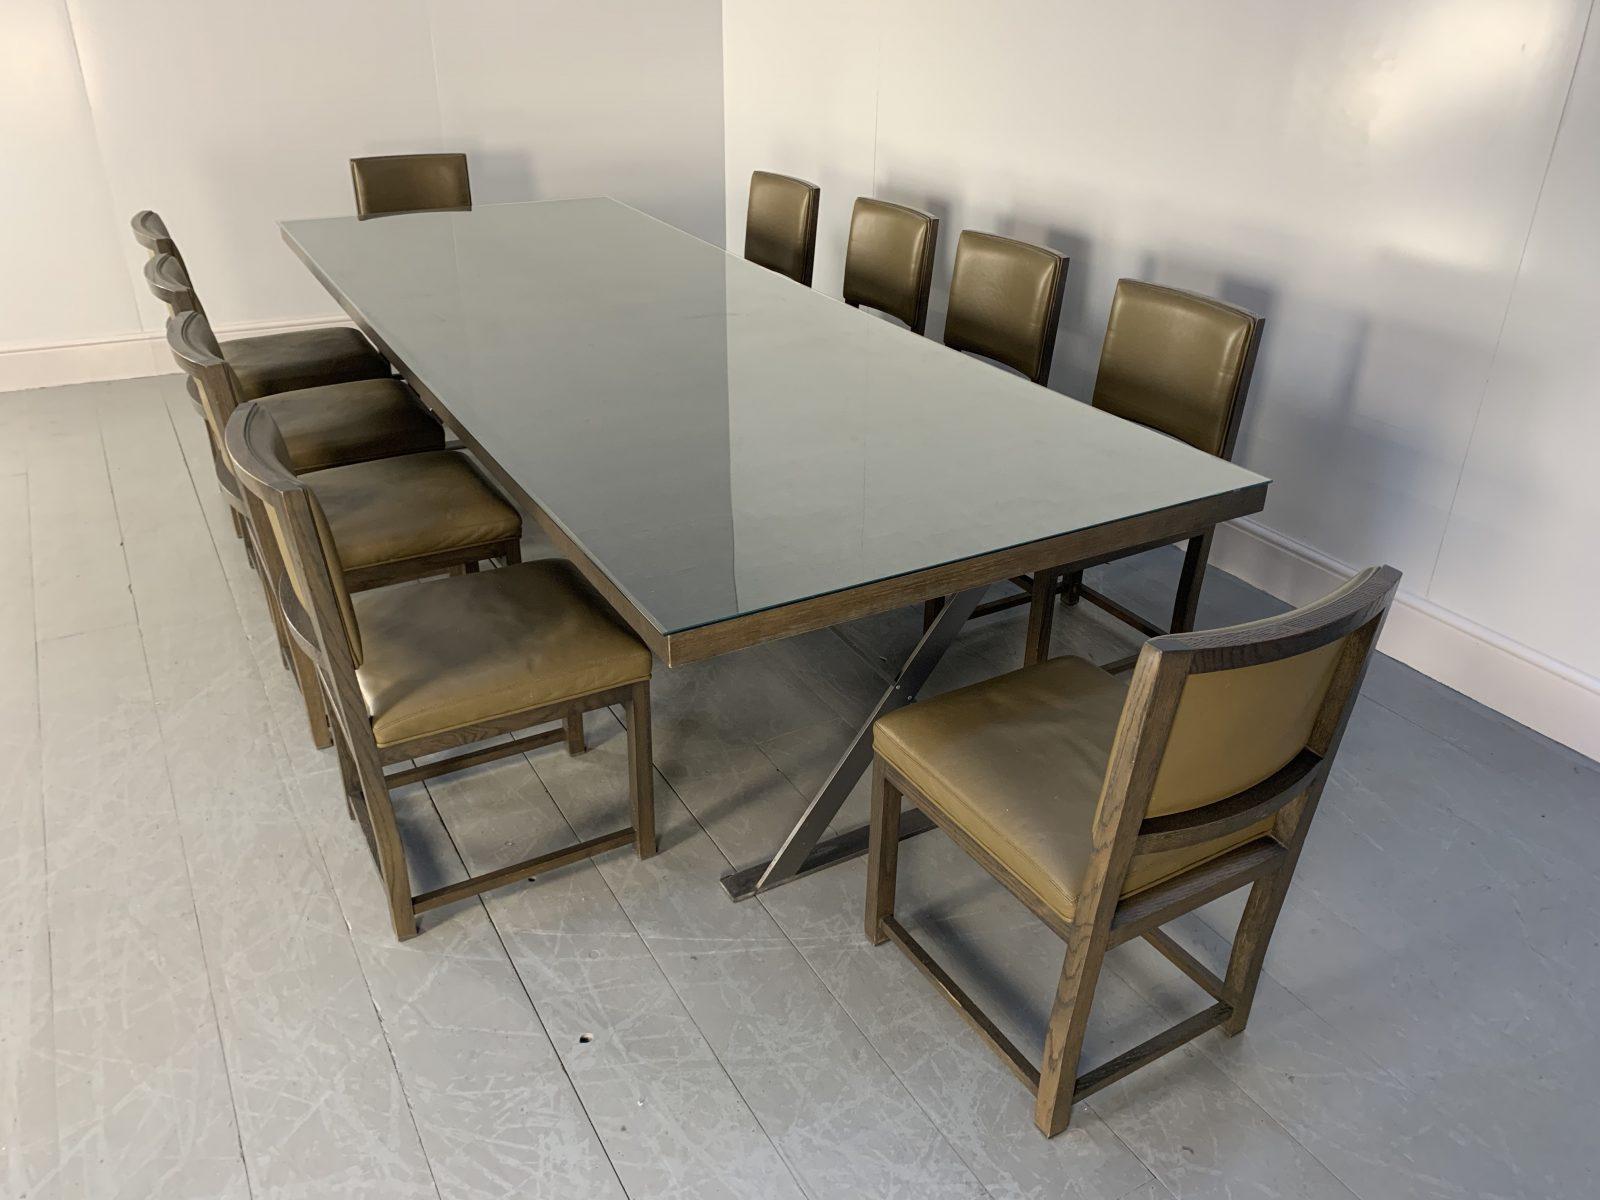 Sublime Huge B&B Italia “Max” Dining Table & 10 “Maxalto” Dining Chairs in Grey In Good Condition For Sale In Barrowford, GB